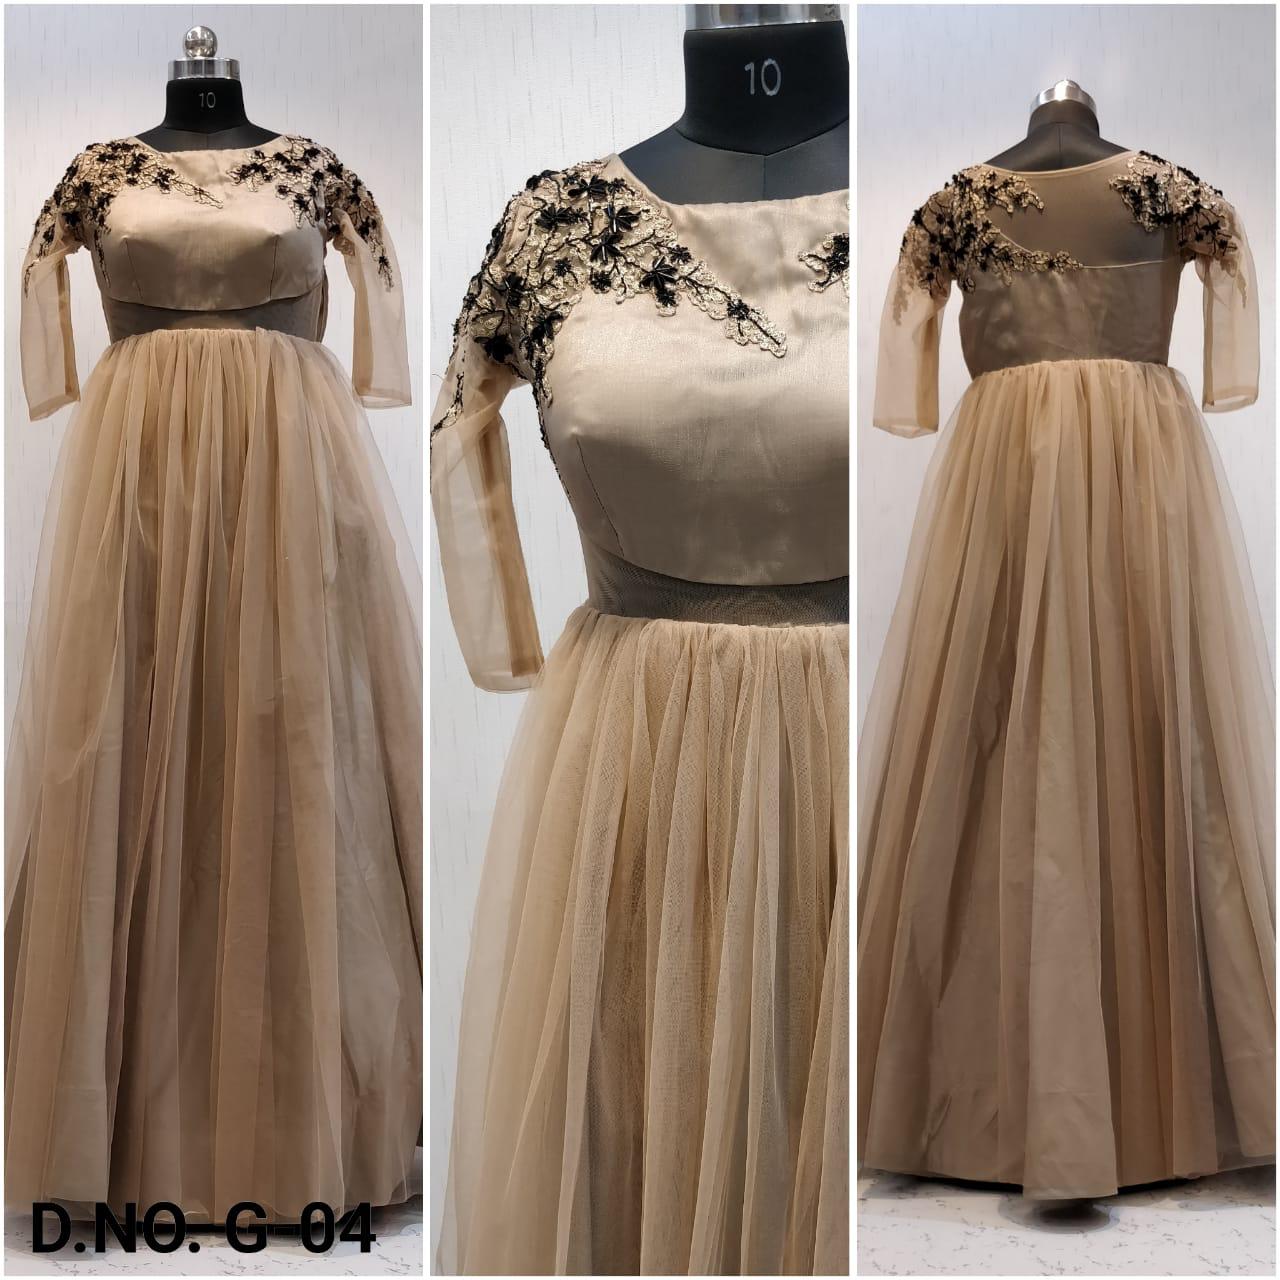 Gown G 04